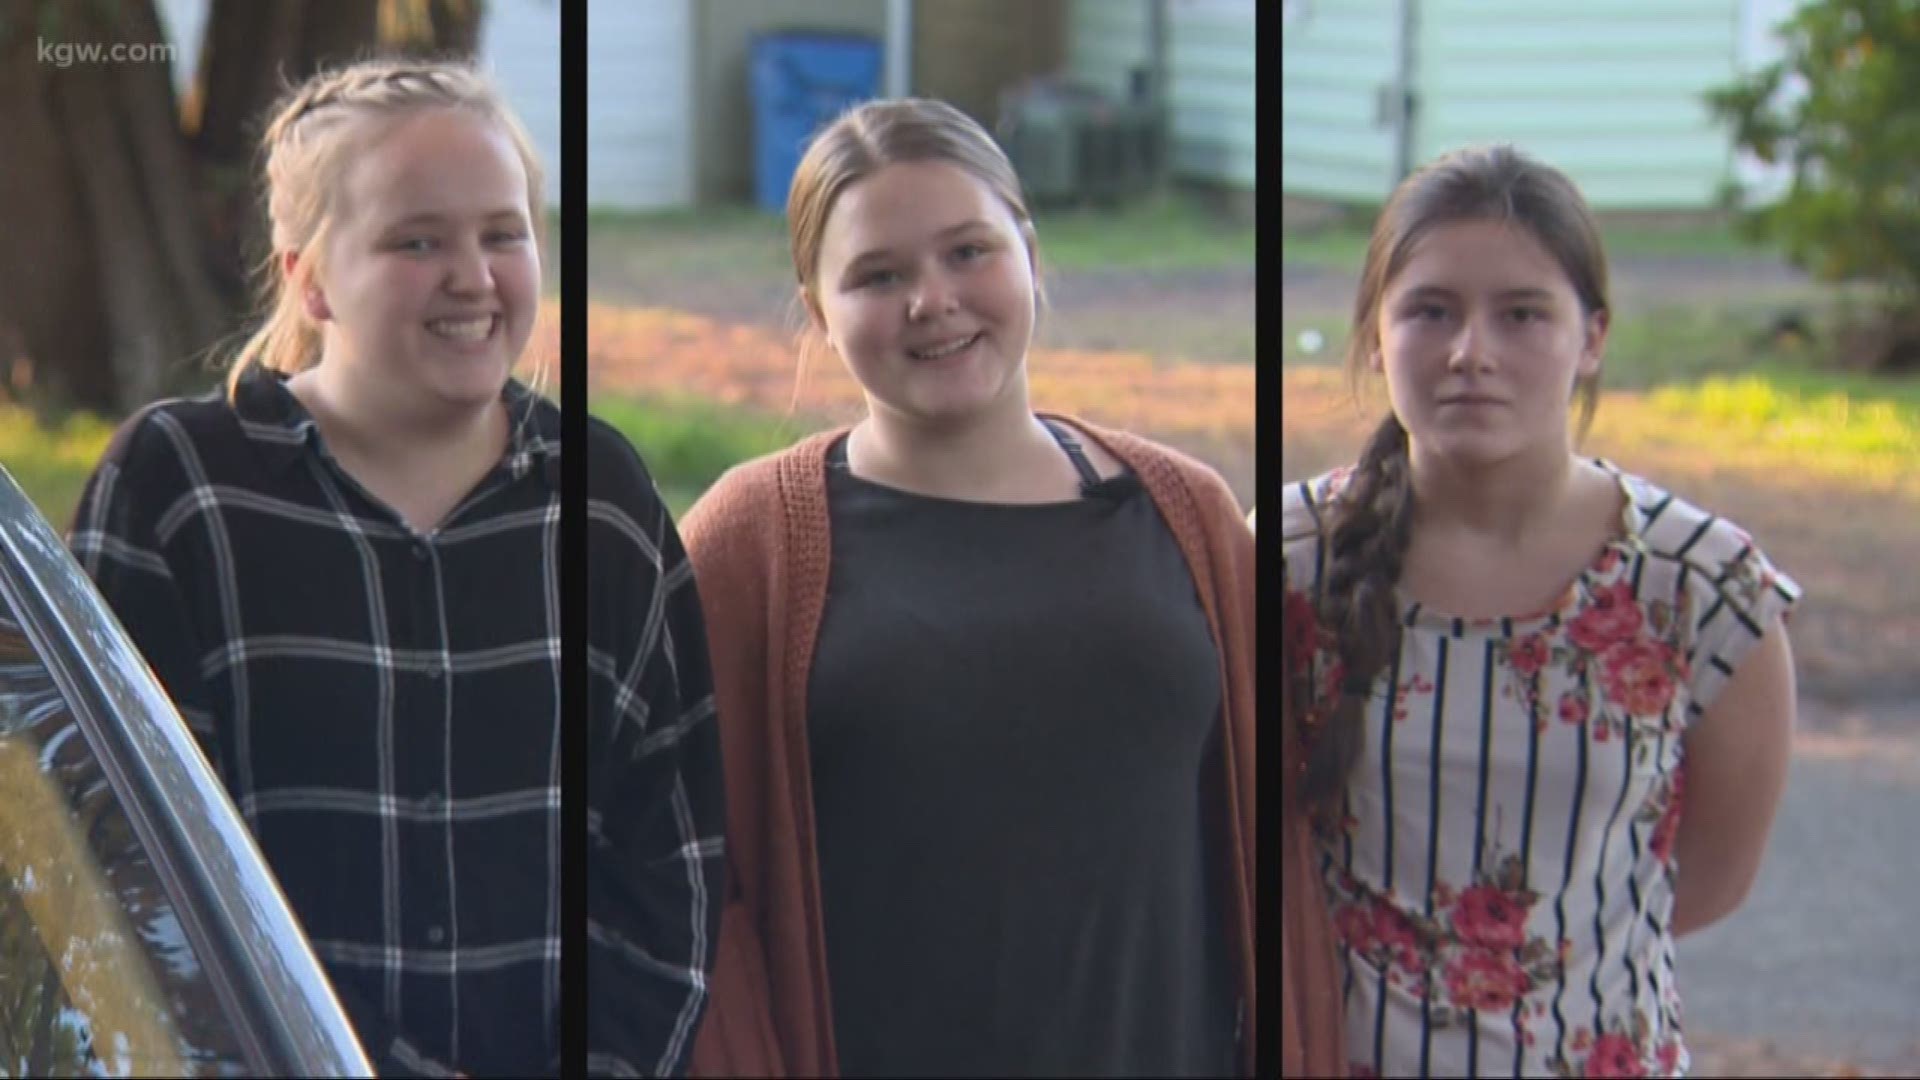 Three teens were in the right place at the right time in Clark County and saved a woman’s life. Here is their story, in their own words.